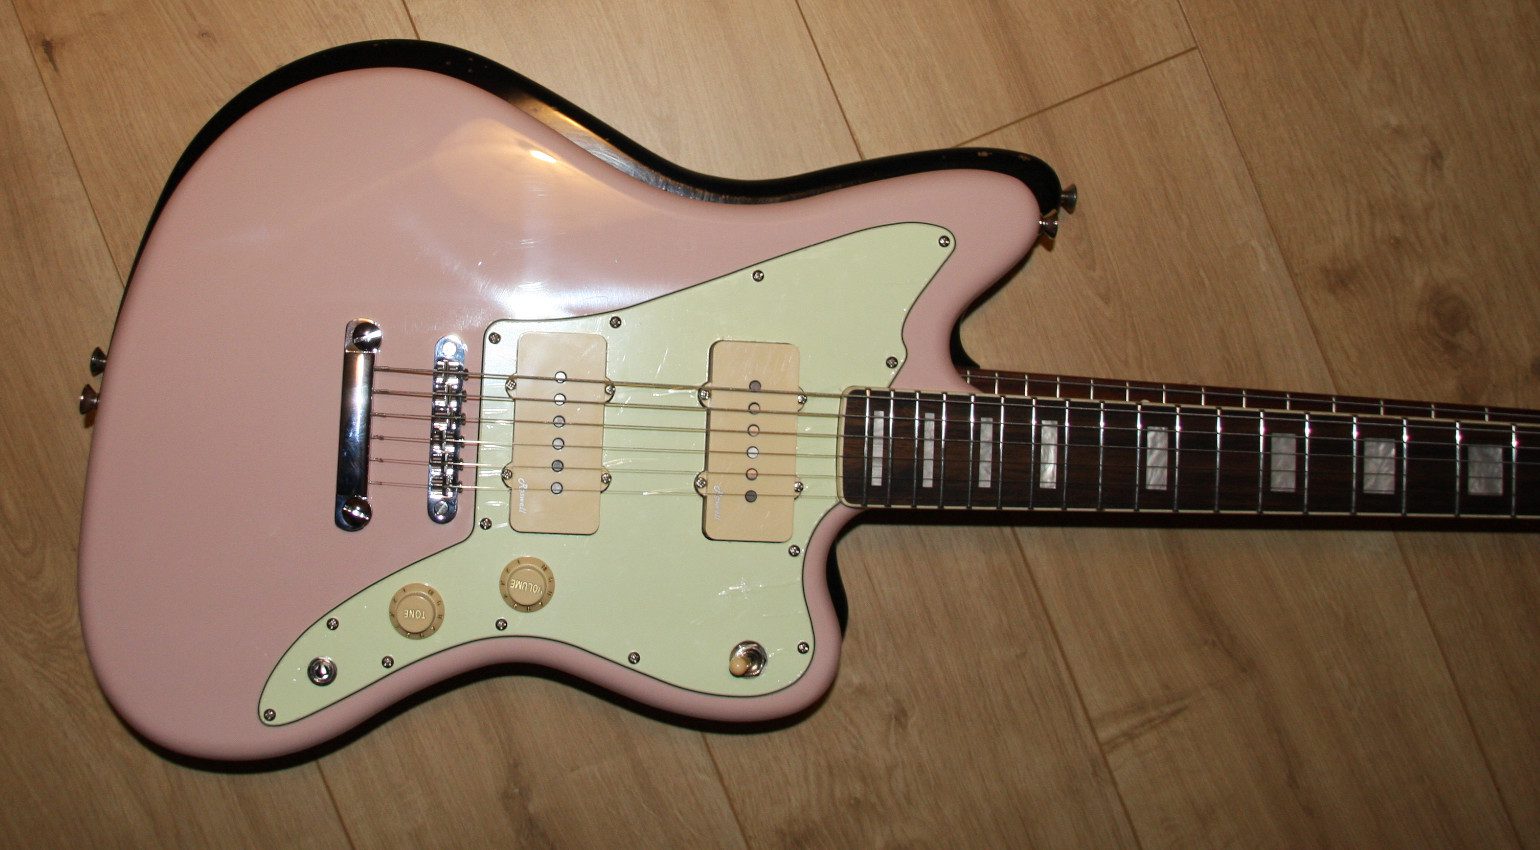 Close-up of the pickguard